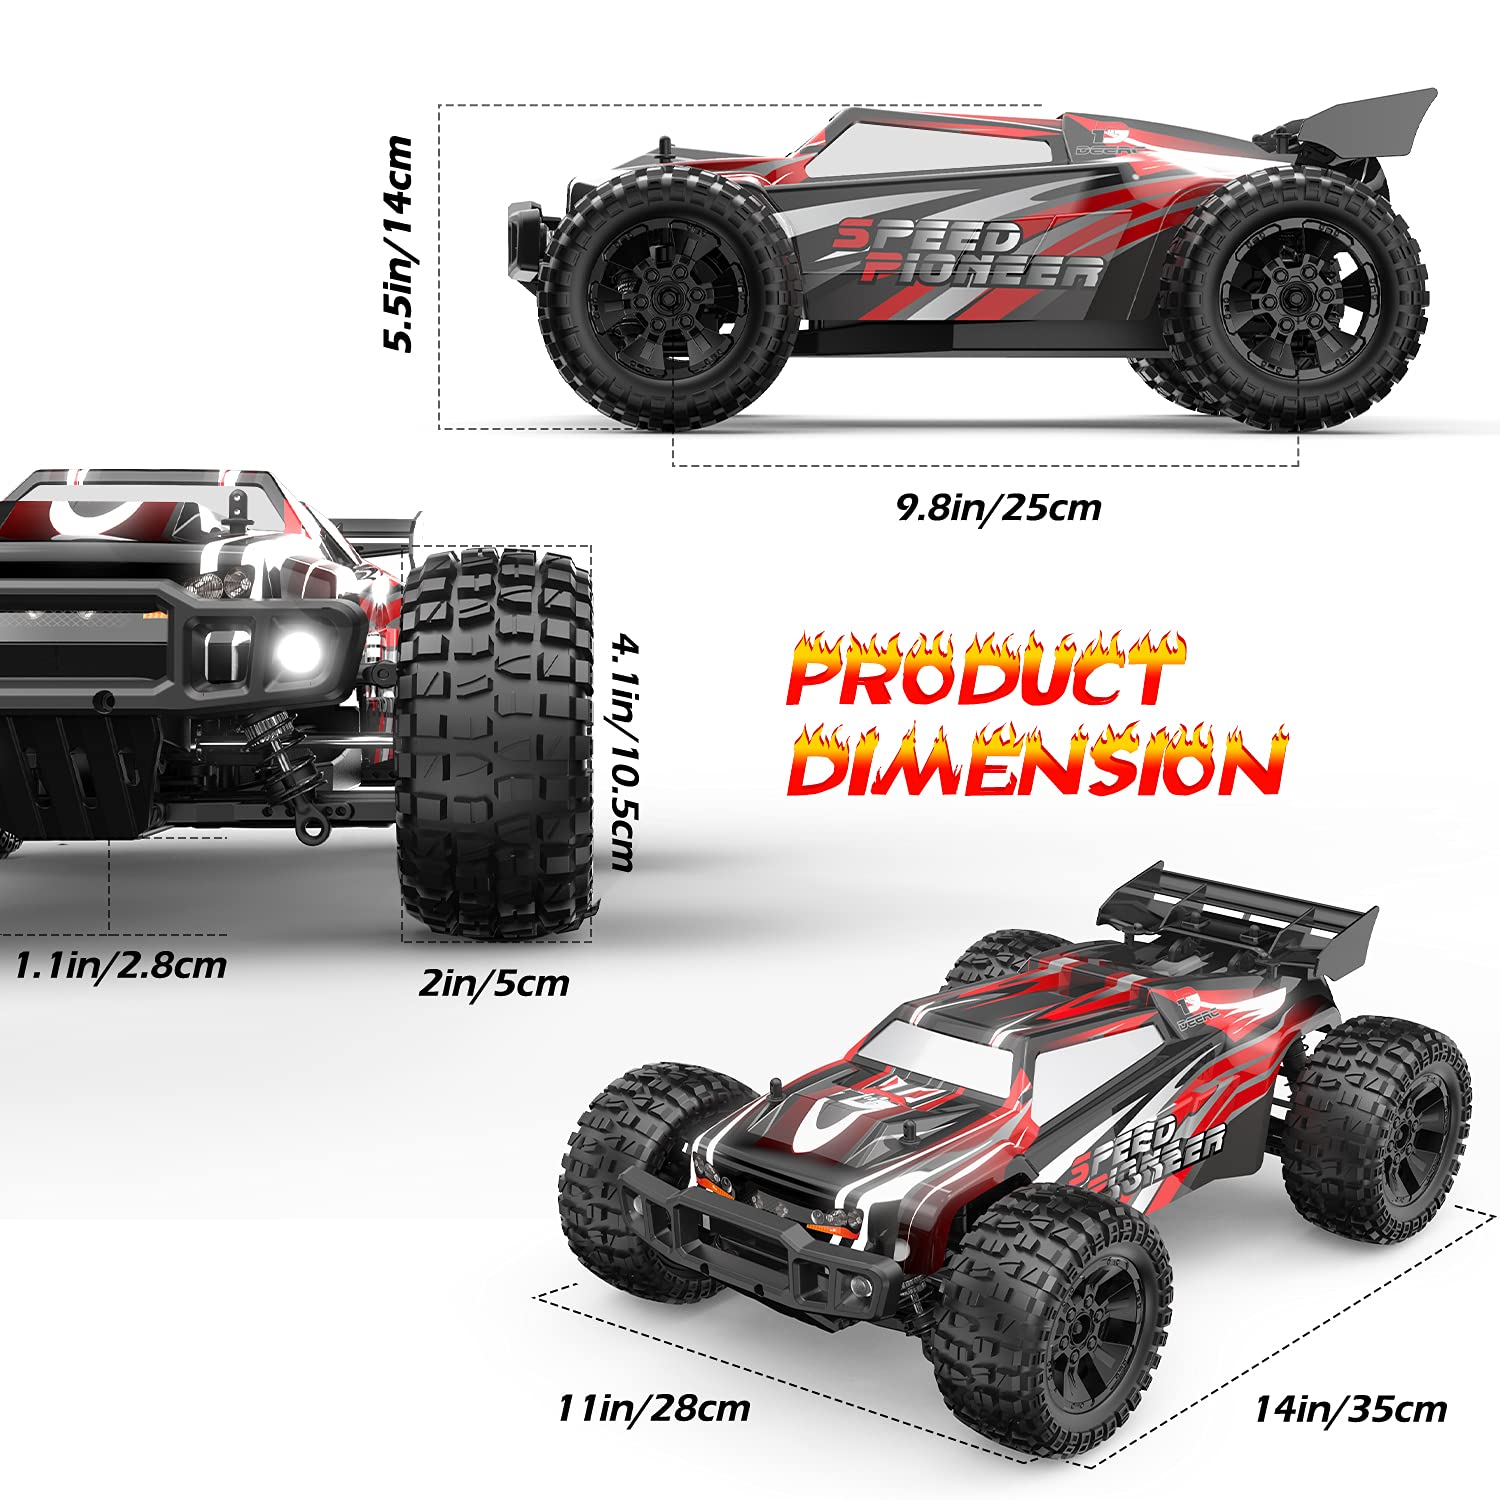 DEERC 9206E DIY Extra Shell 1:10 Scale Large RC Cars,48+ KM/H Hobby Gr